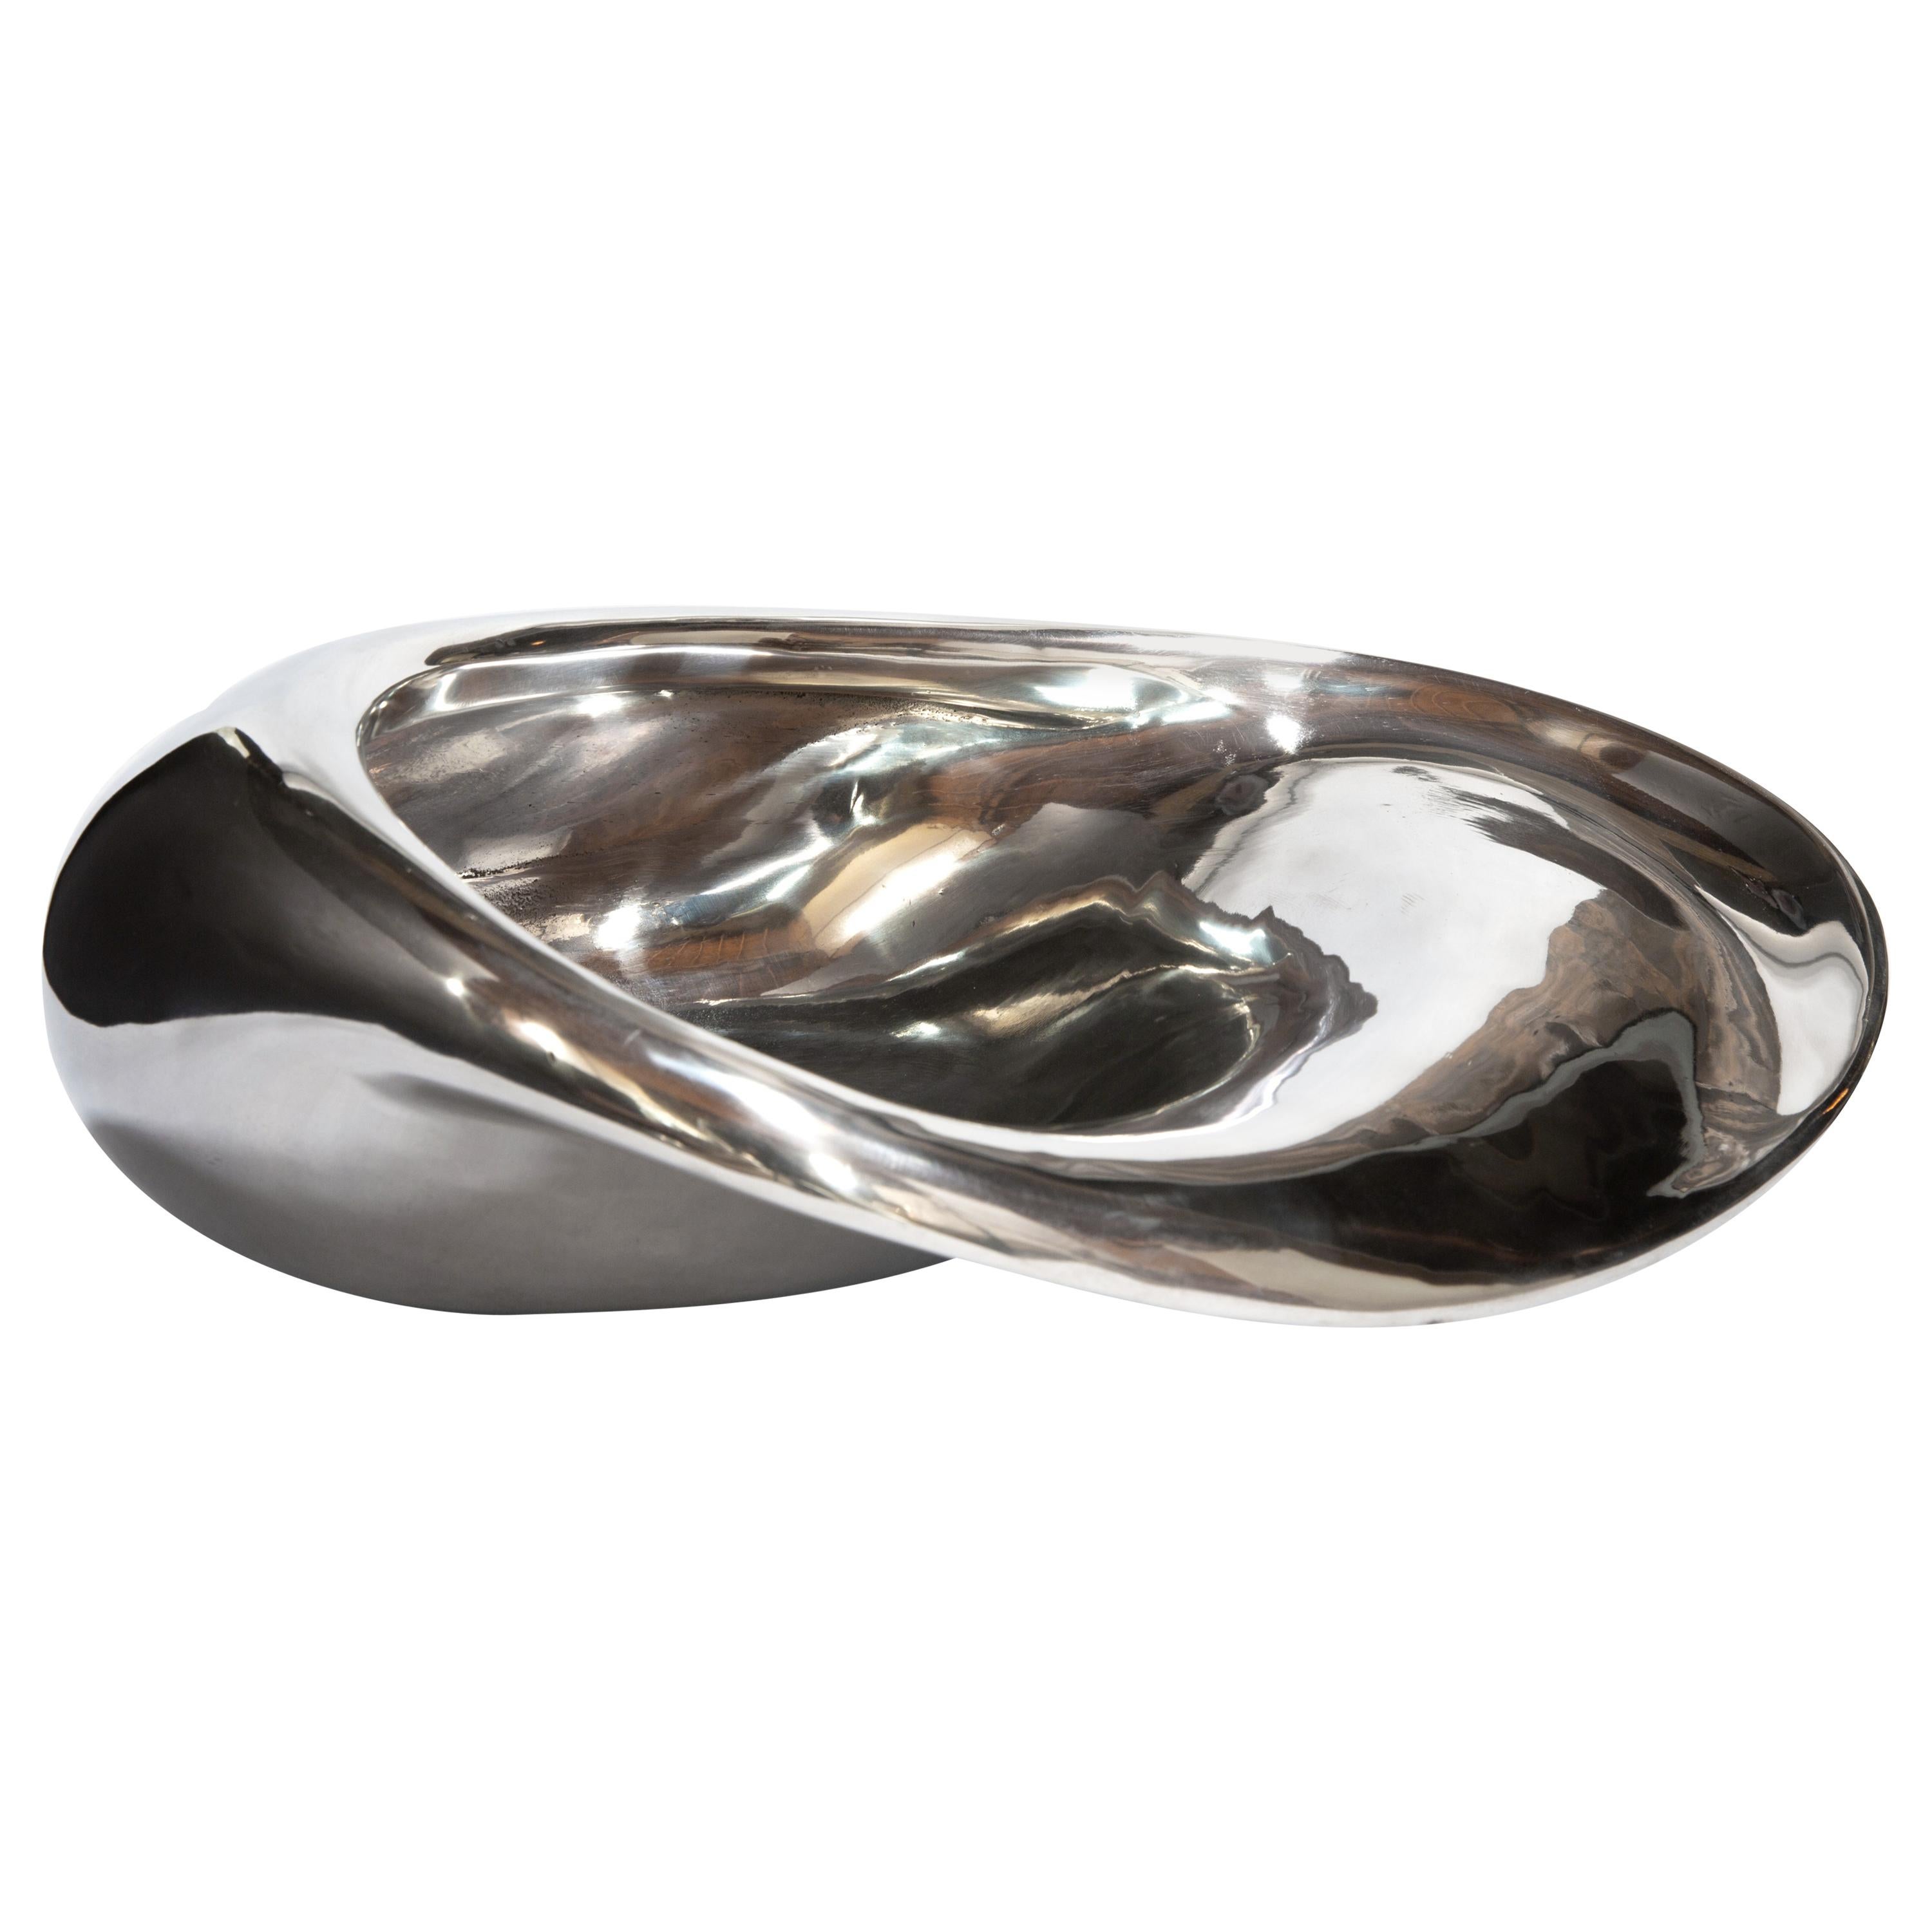 H57 Bowl / Vase in Polished Recycled Cast Aluminum, by Jordan Mozer, USA, 2007 For Sale